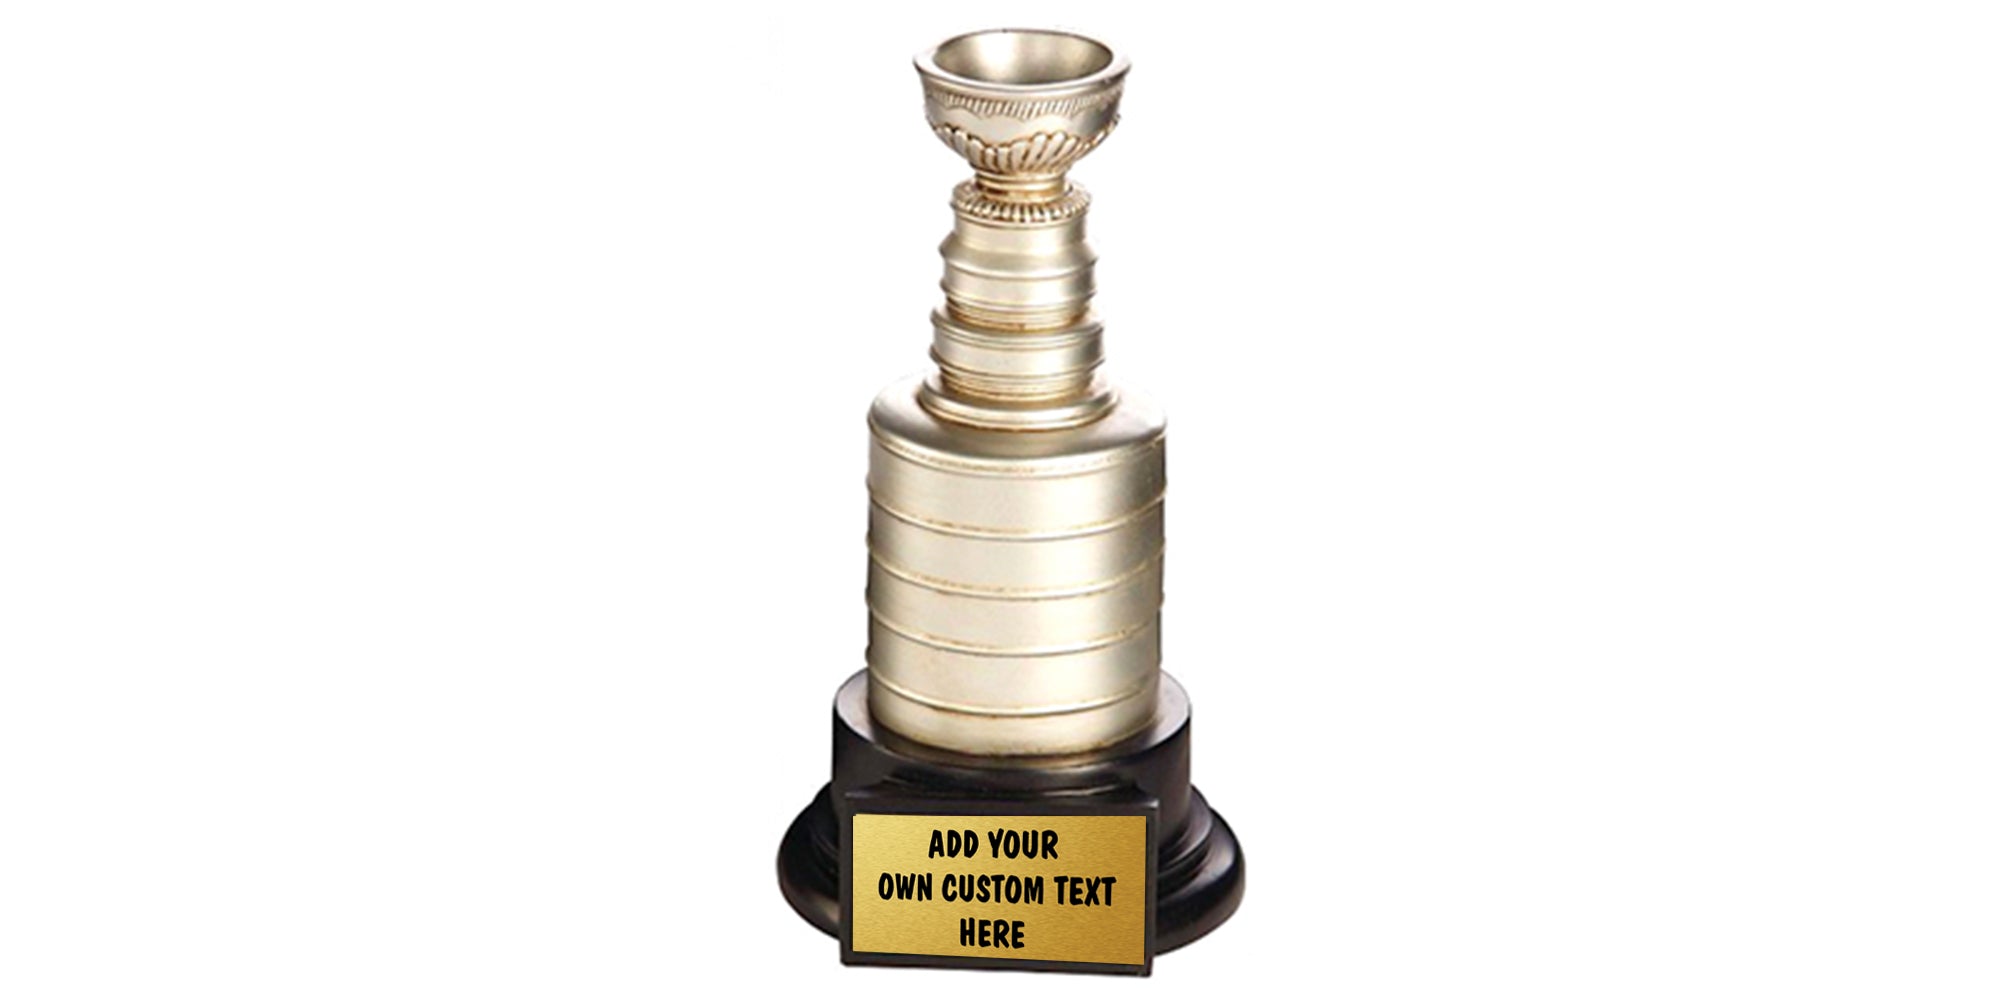  The Sports Vault NHL 14-inch Stanley Cup Champions Trophy  Replica for Dad - Best Gifts for Men, Hockey Fans, Players, Coaches &  Collectors : Sports & Outdoors